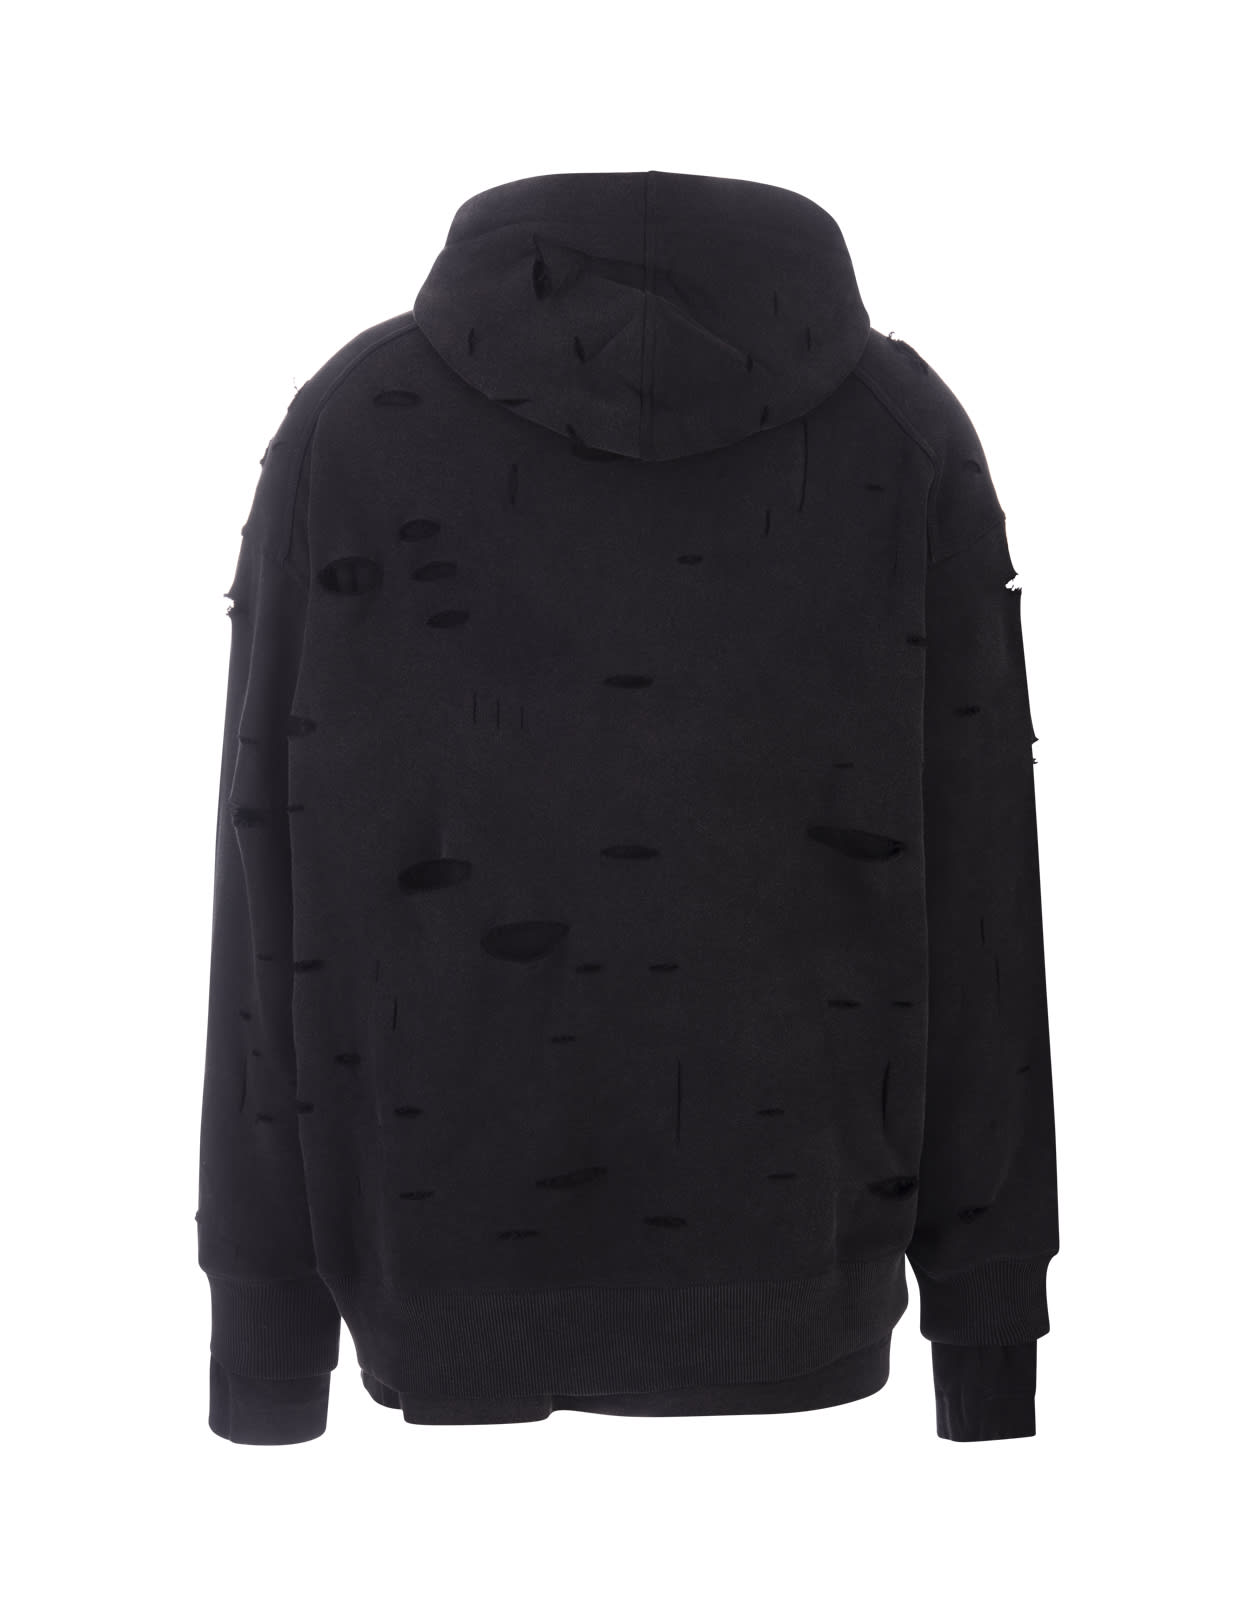 Shop Givenchy Black Destroyed Hoodie With Logo